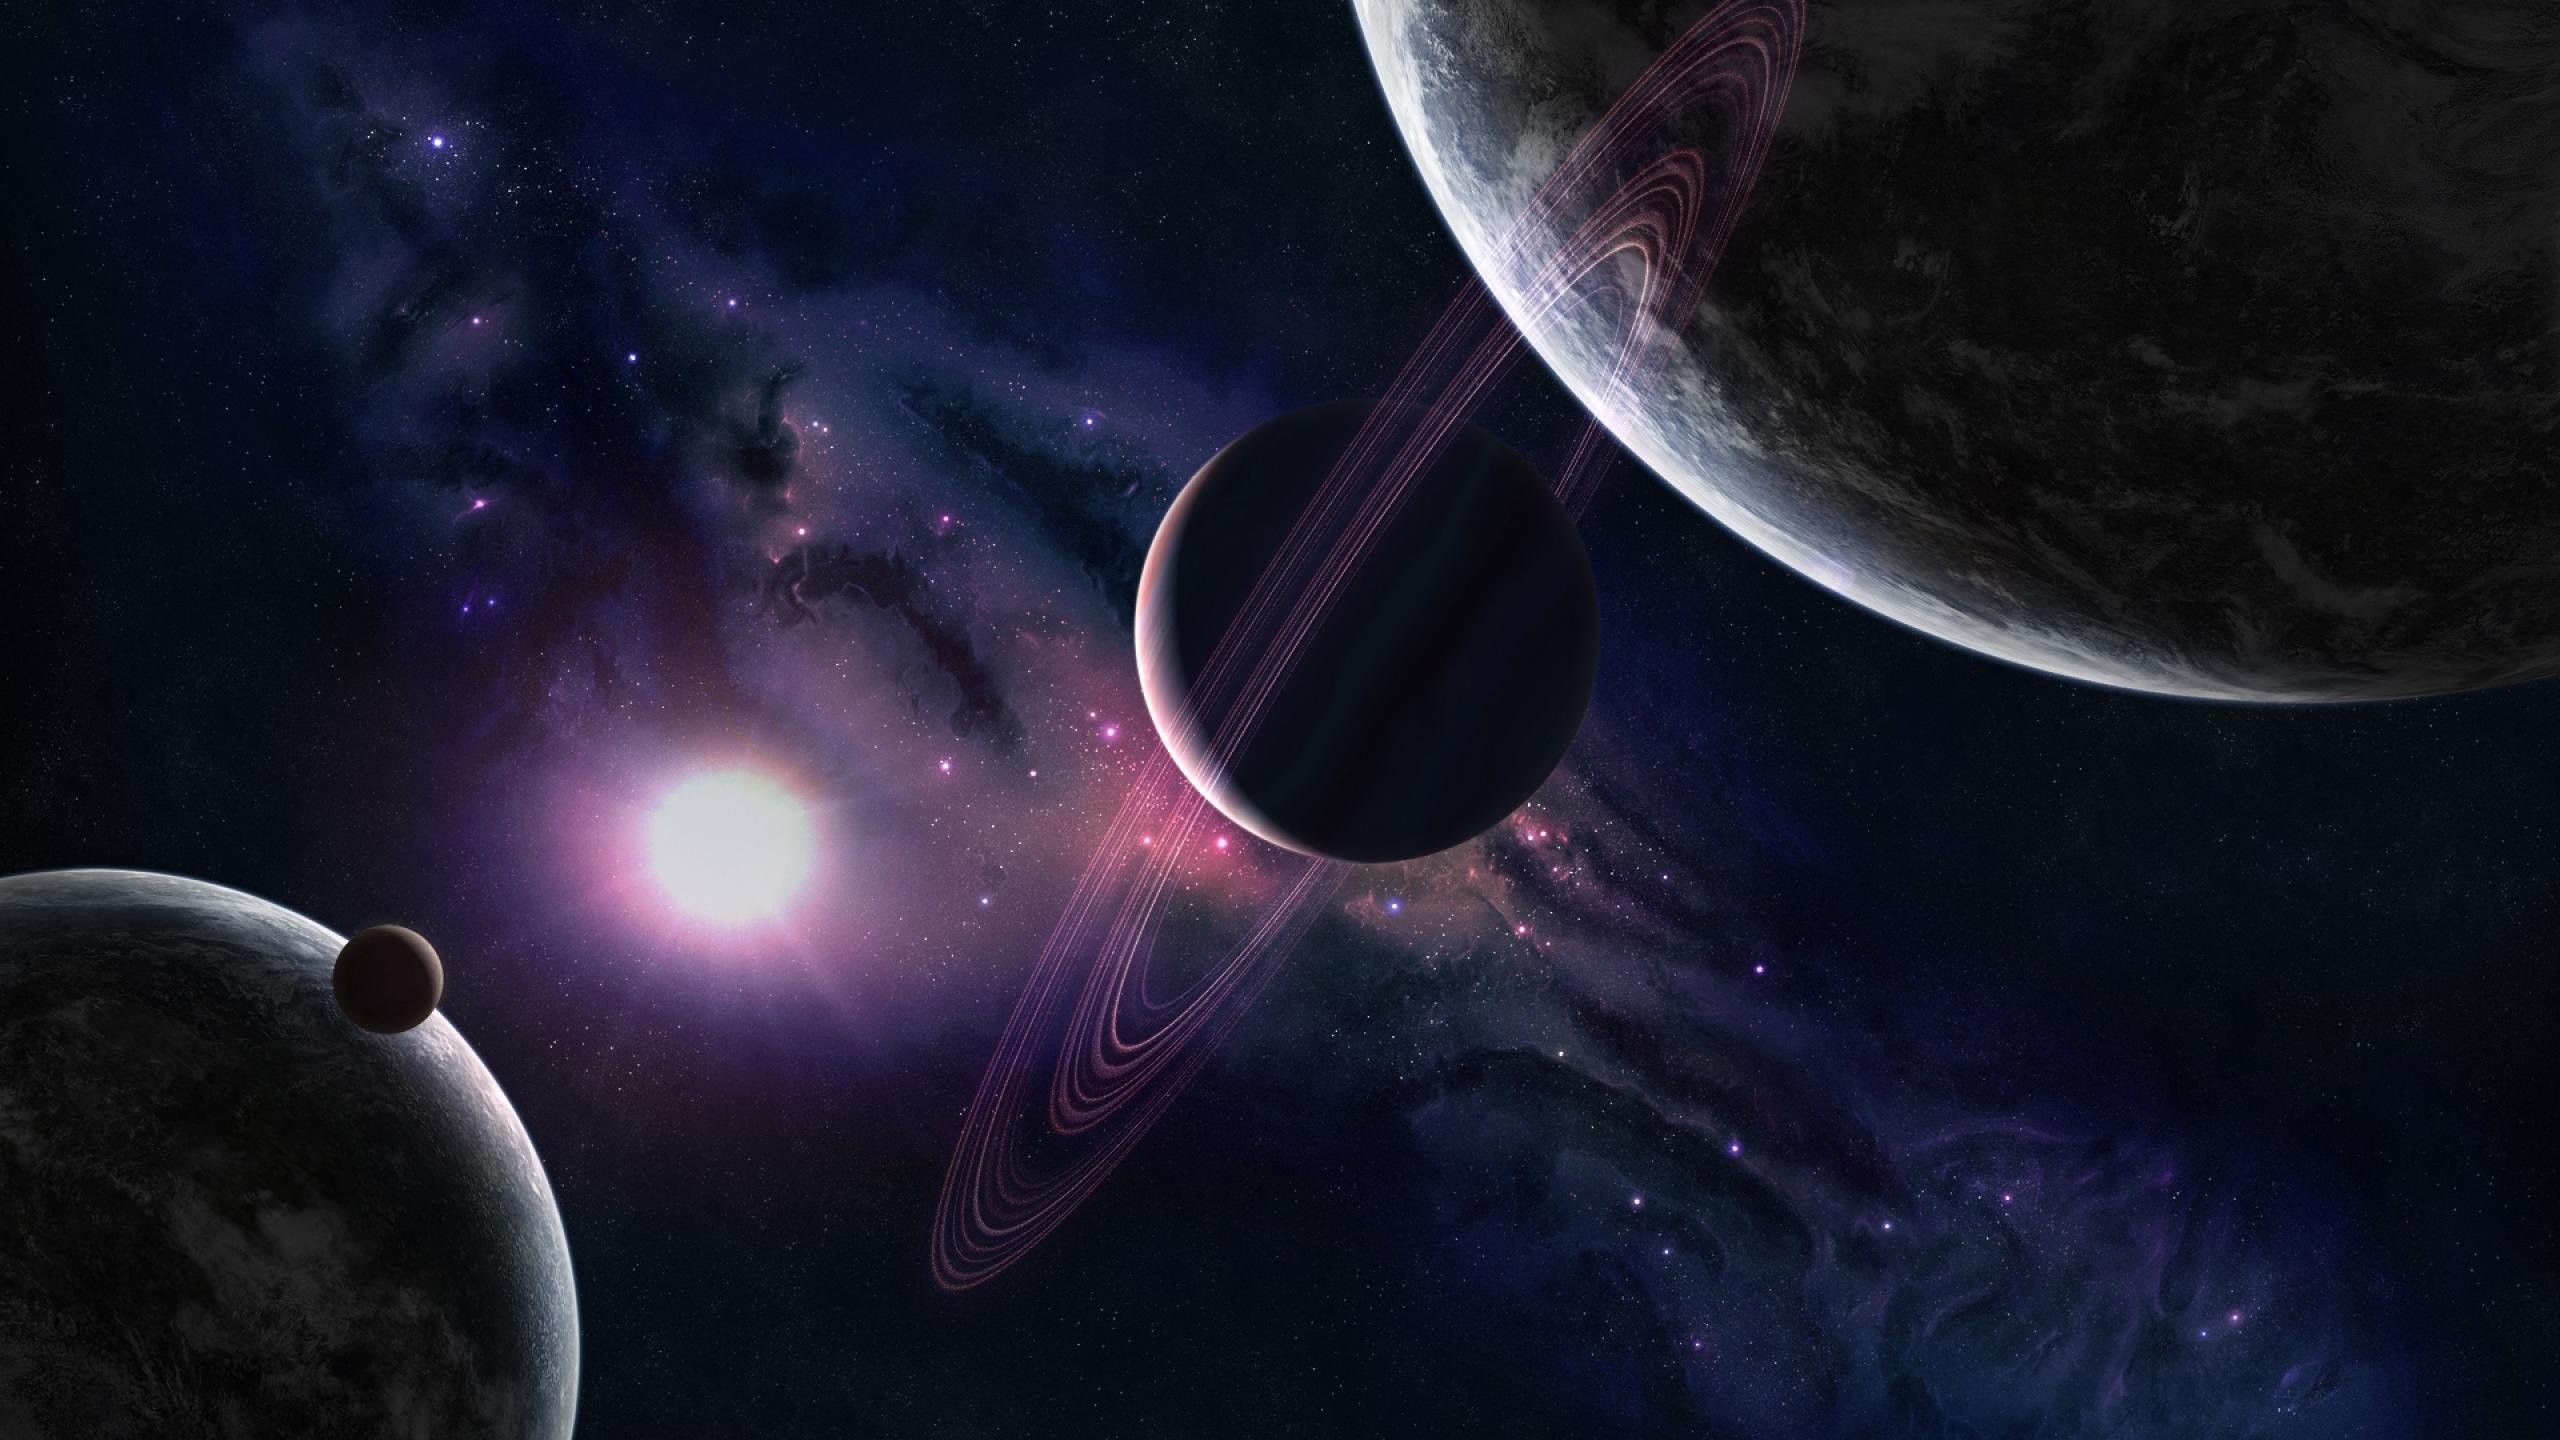 2560x1440 Solar System D Wallpaper Pro Android Apps on Google Play 1920Ã1080 Wallpapers  Solar System